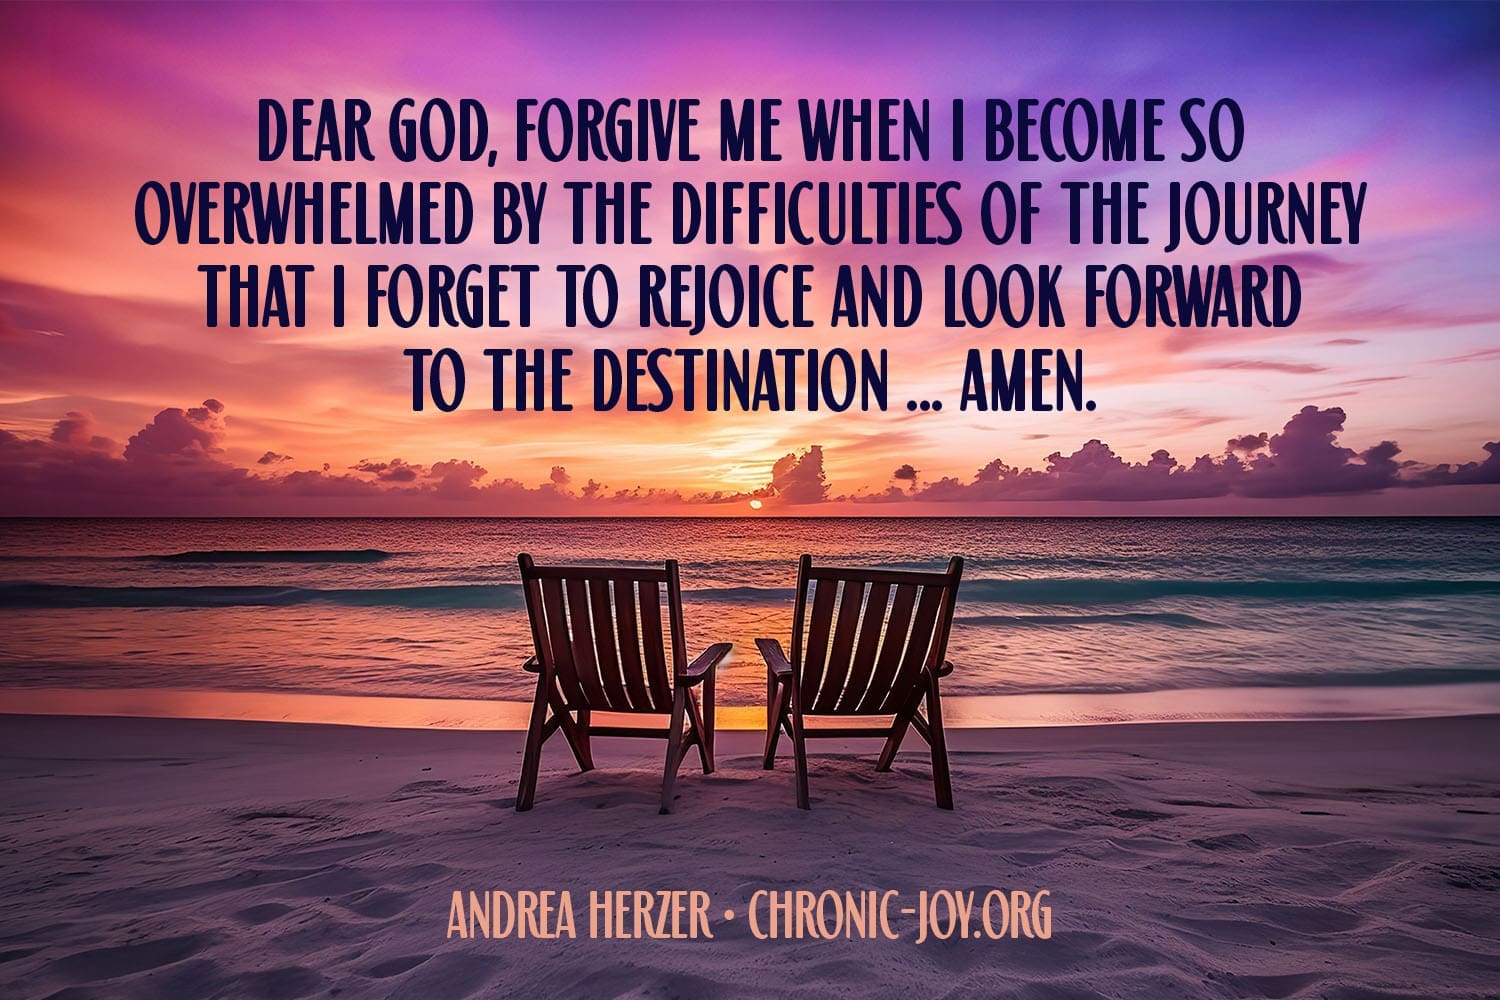 "Dear God, forgive me when I become so overwhelmed by the difficulties of the journey that i forget to rejoice and look forward to the destination ... Amen." Andrea Herzer